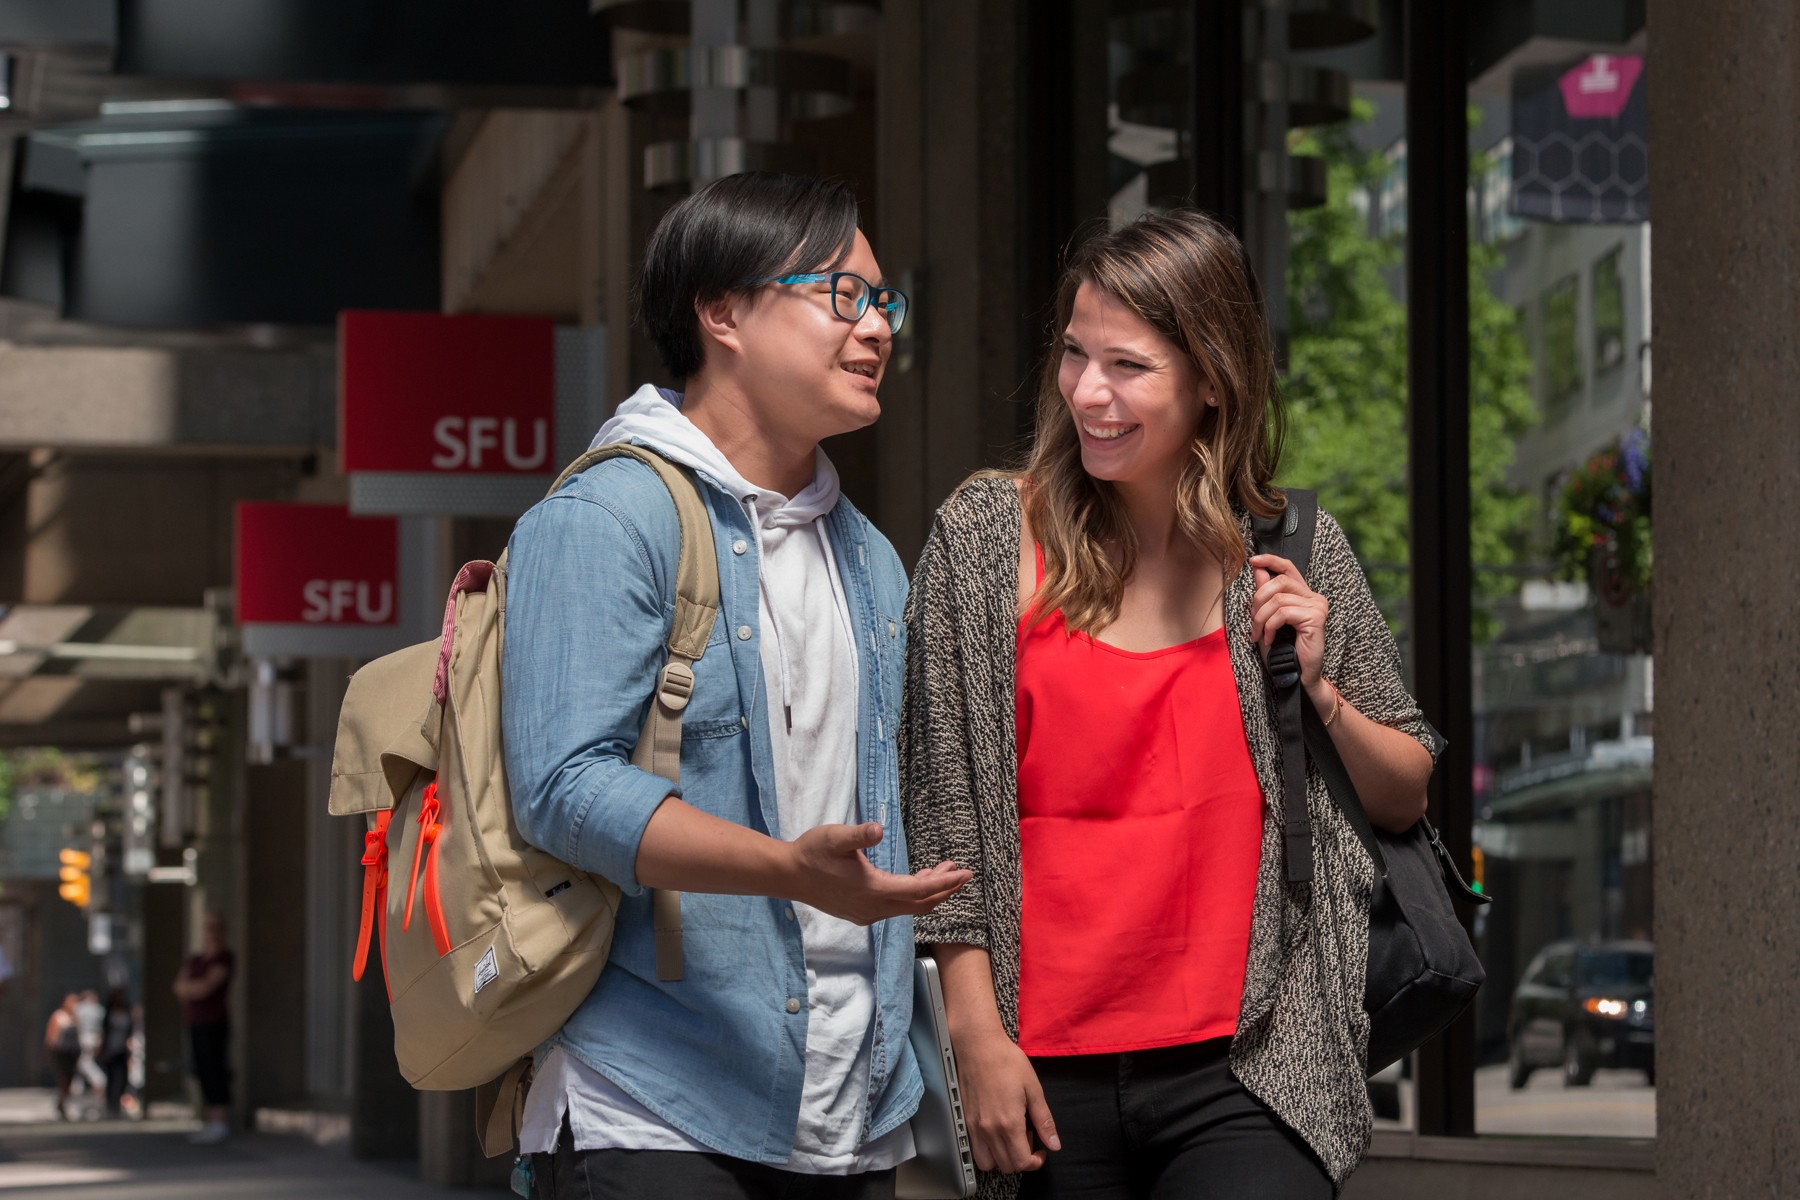 This is an image of two SFU students talking outside